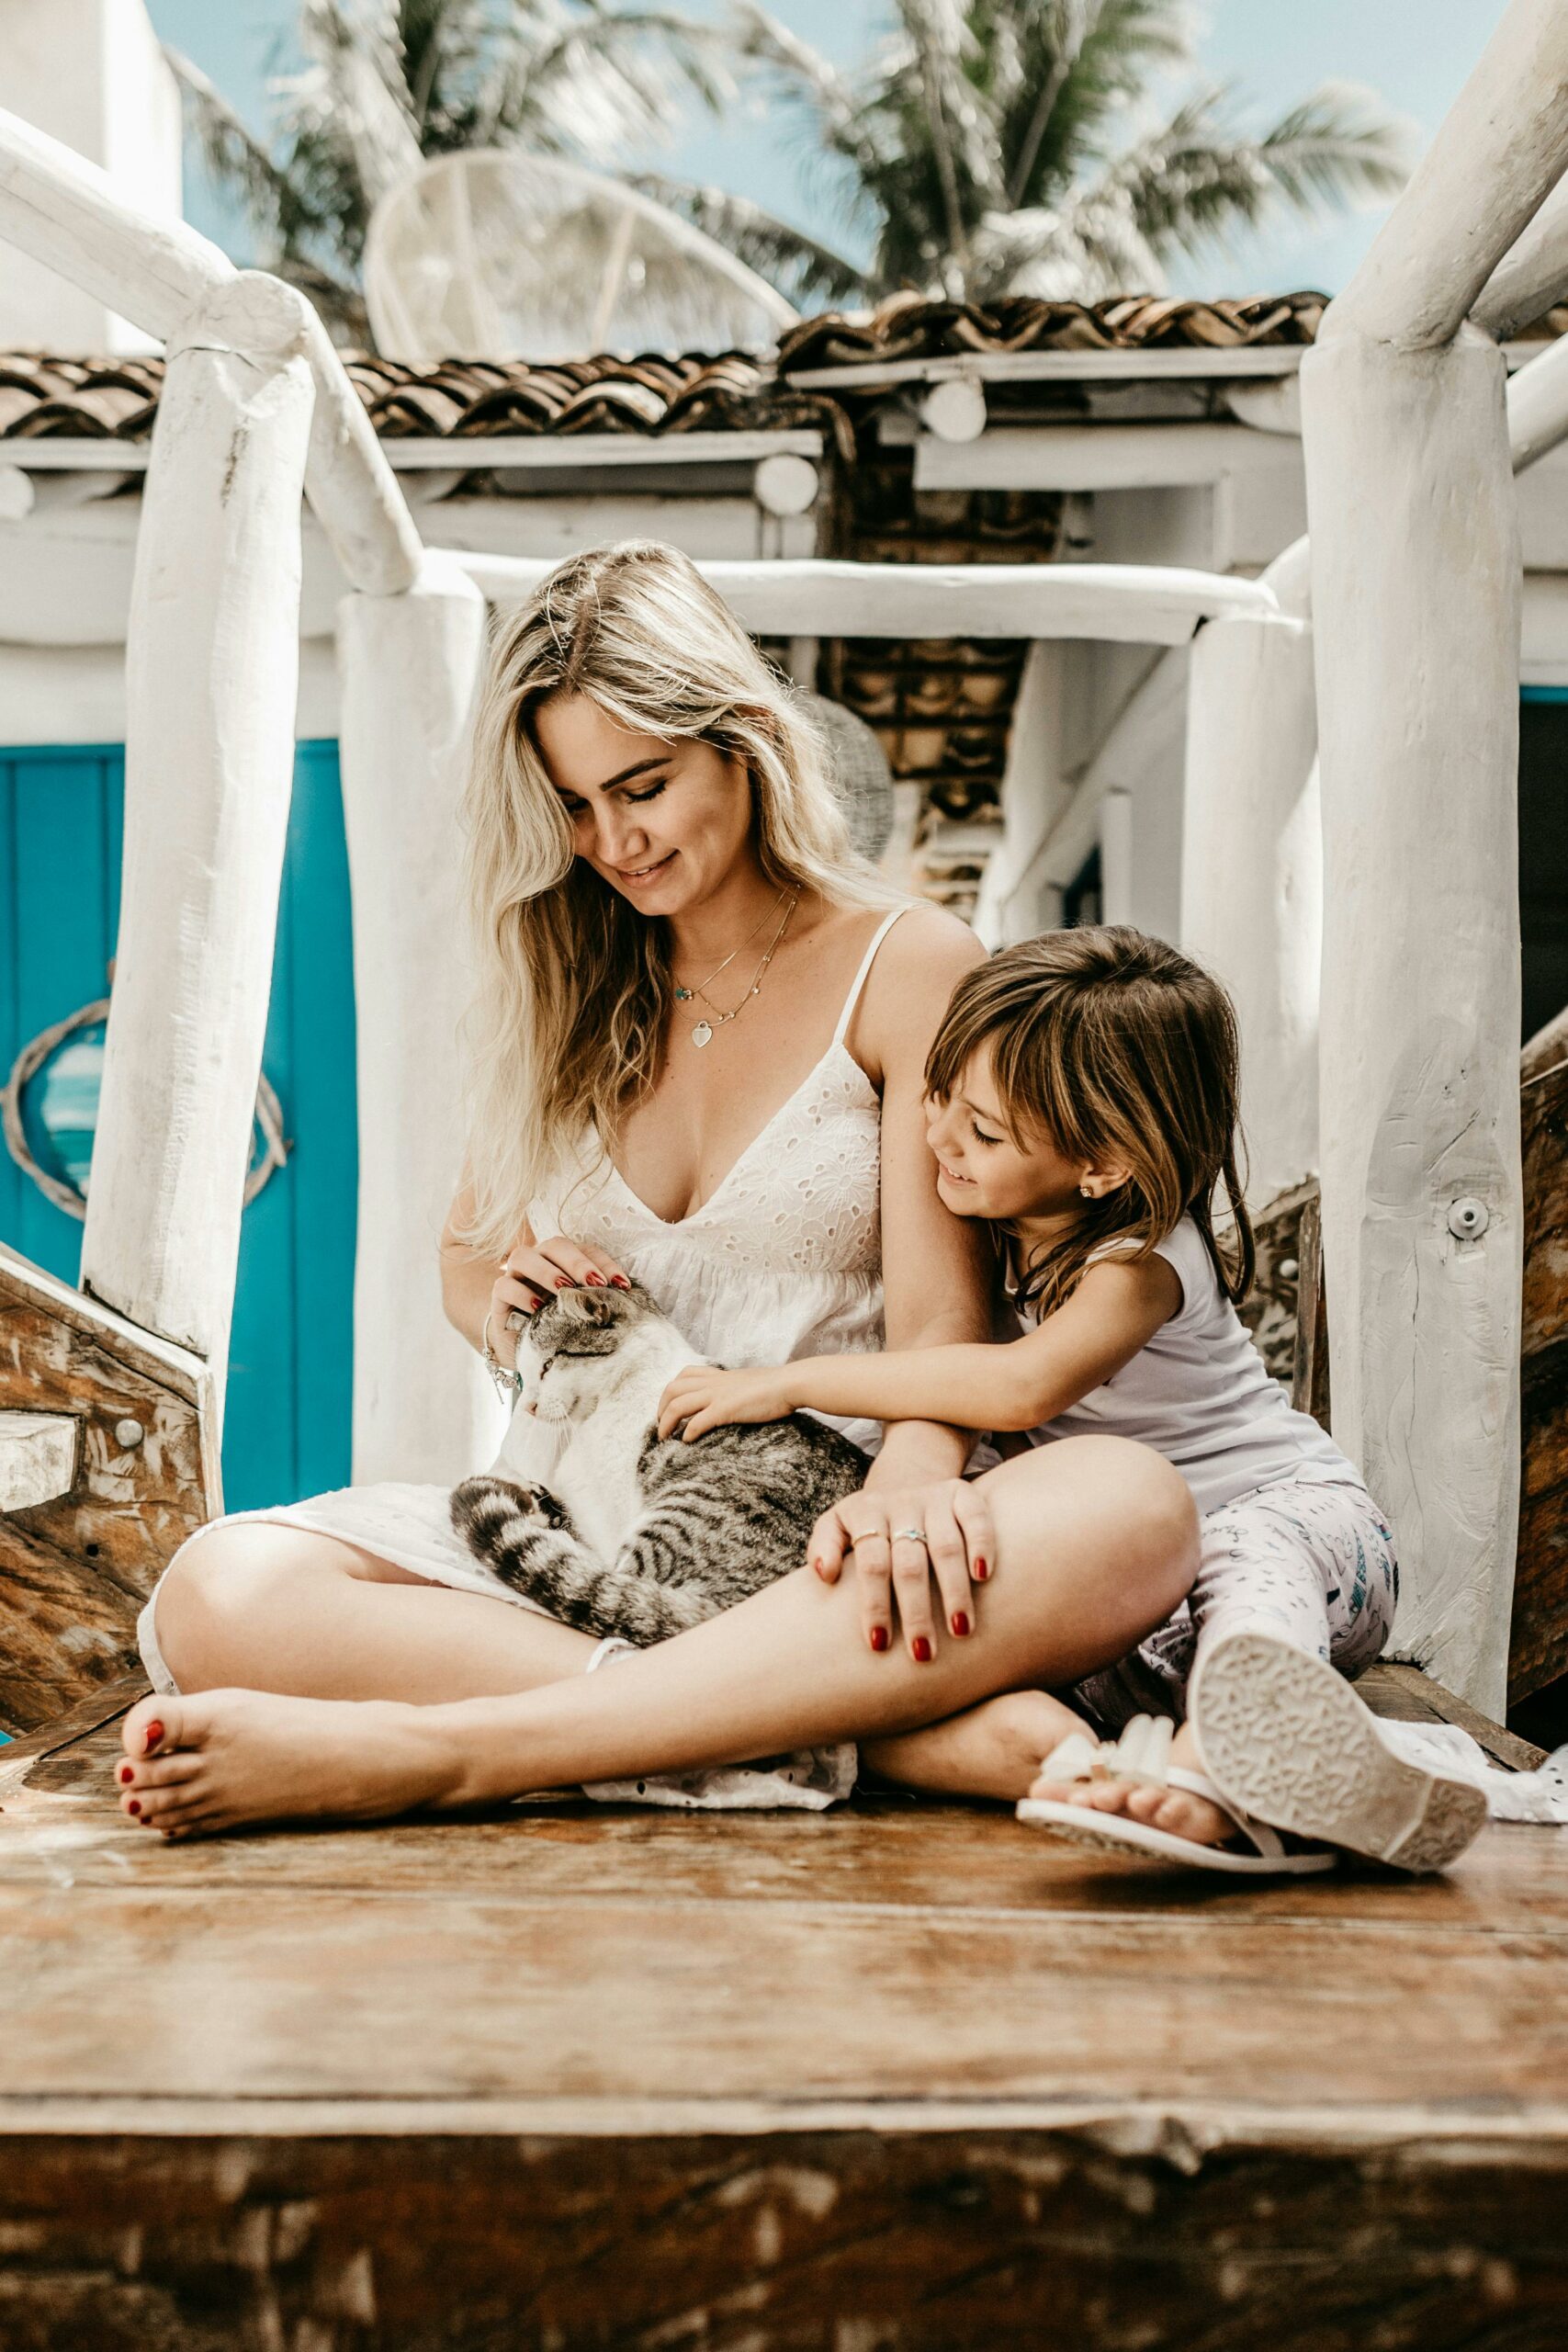 Cat Factors To Consider For Kids